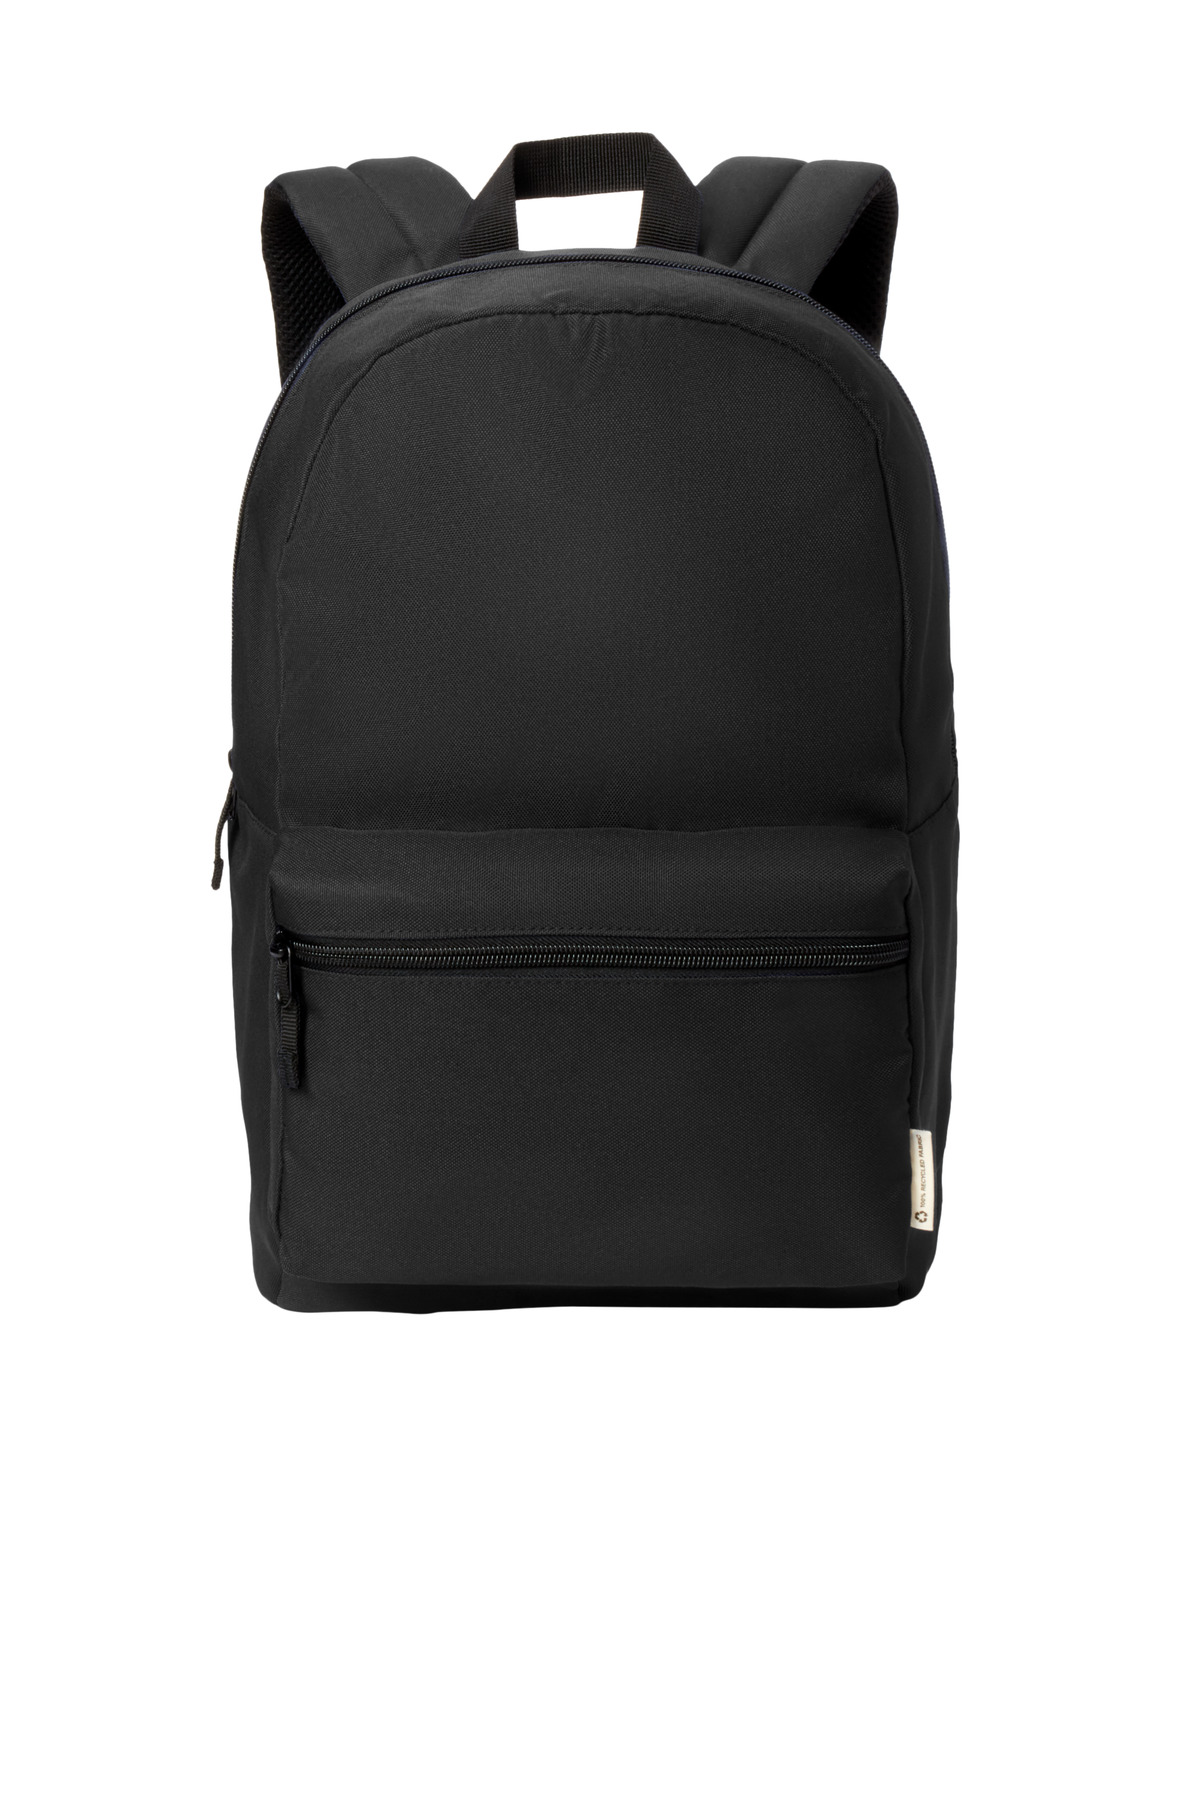 Port Authority C-FREE Recycled Backpack-